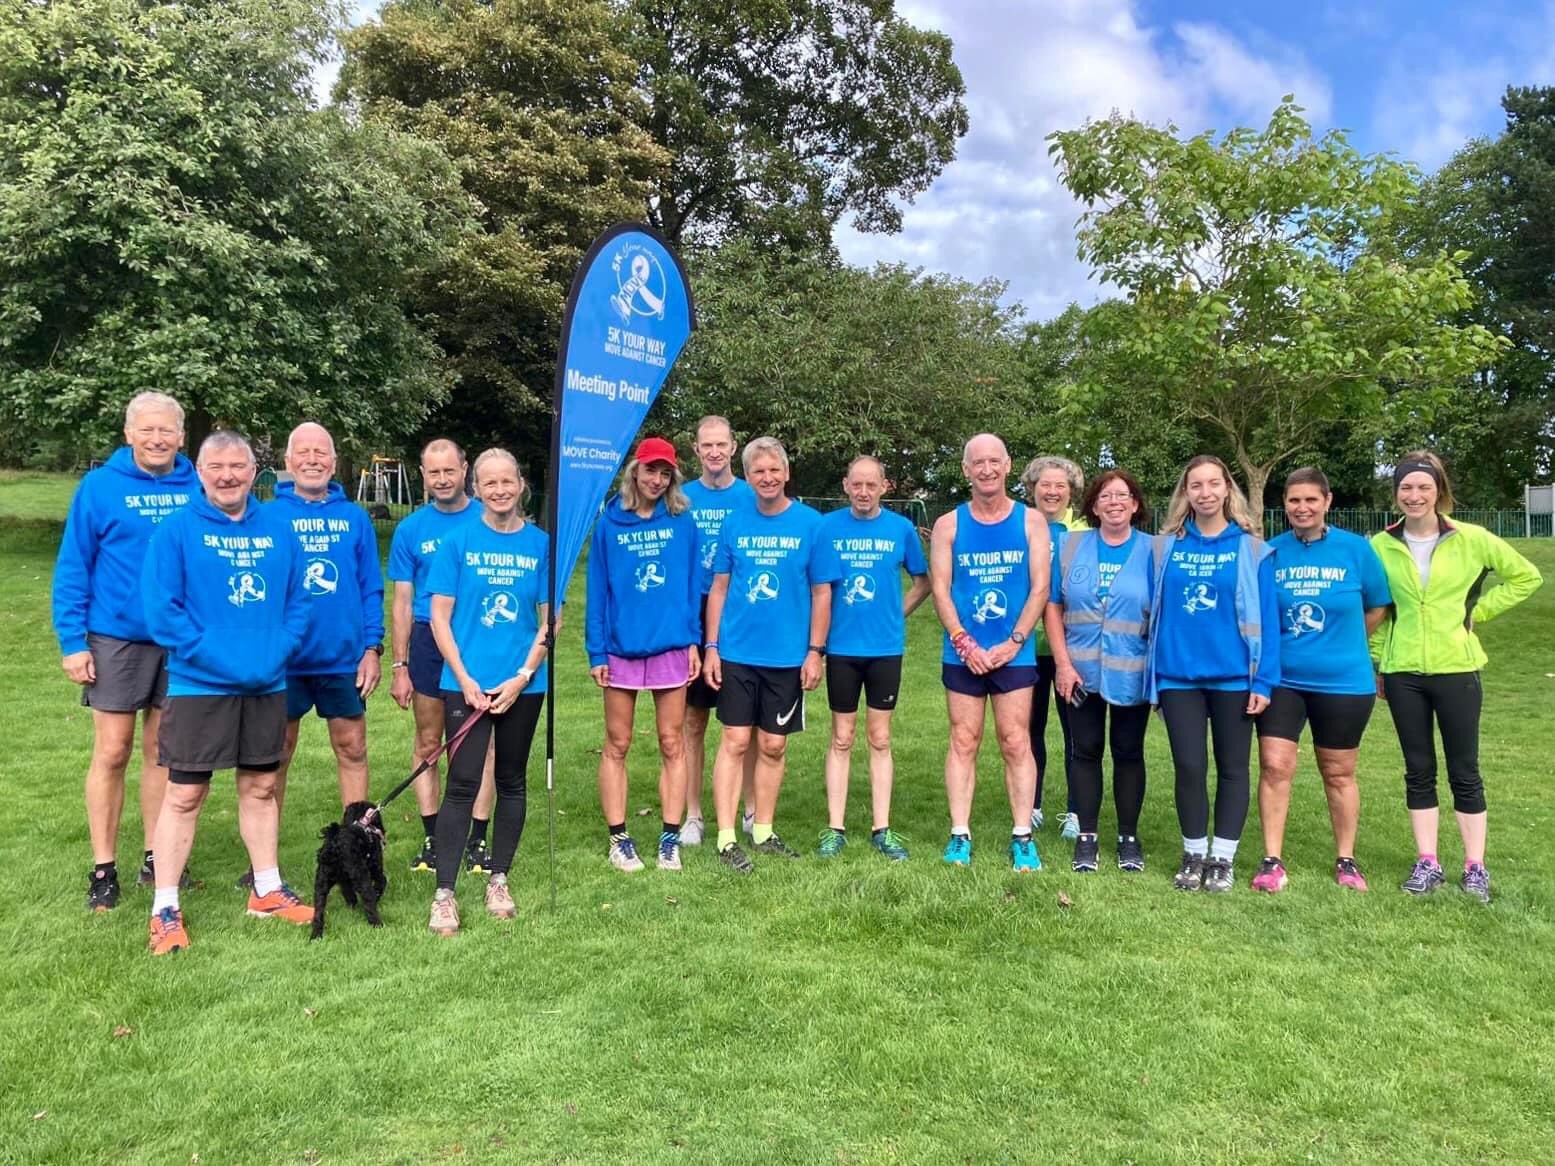 A large group of smiling people standing on grass in a park against a backdrop of green trees. They are wearing running and walking gear and blue tops with 5K Your Way on the front.